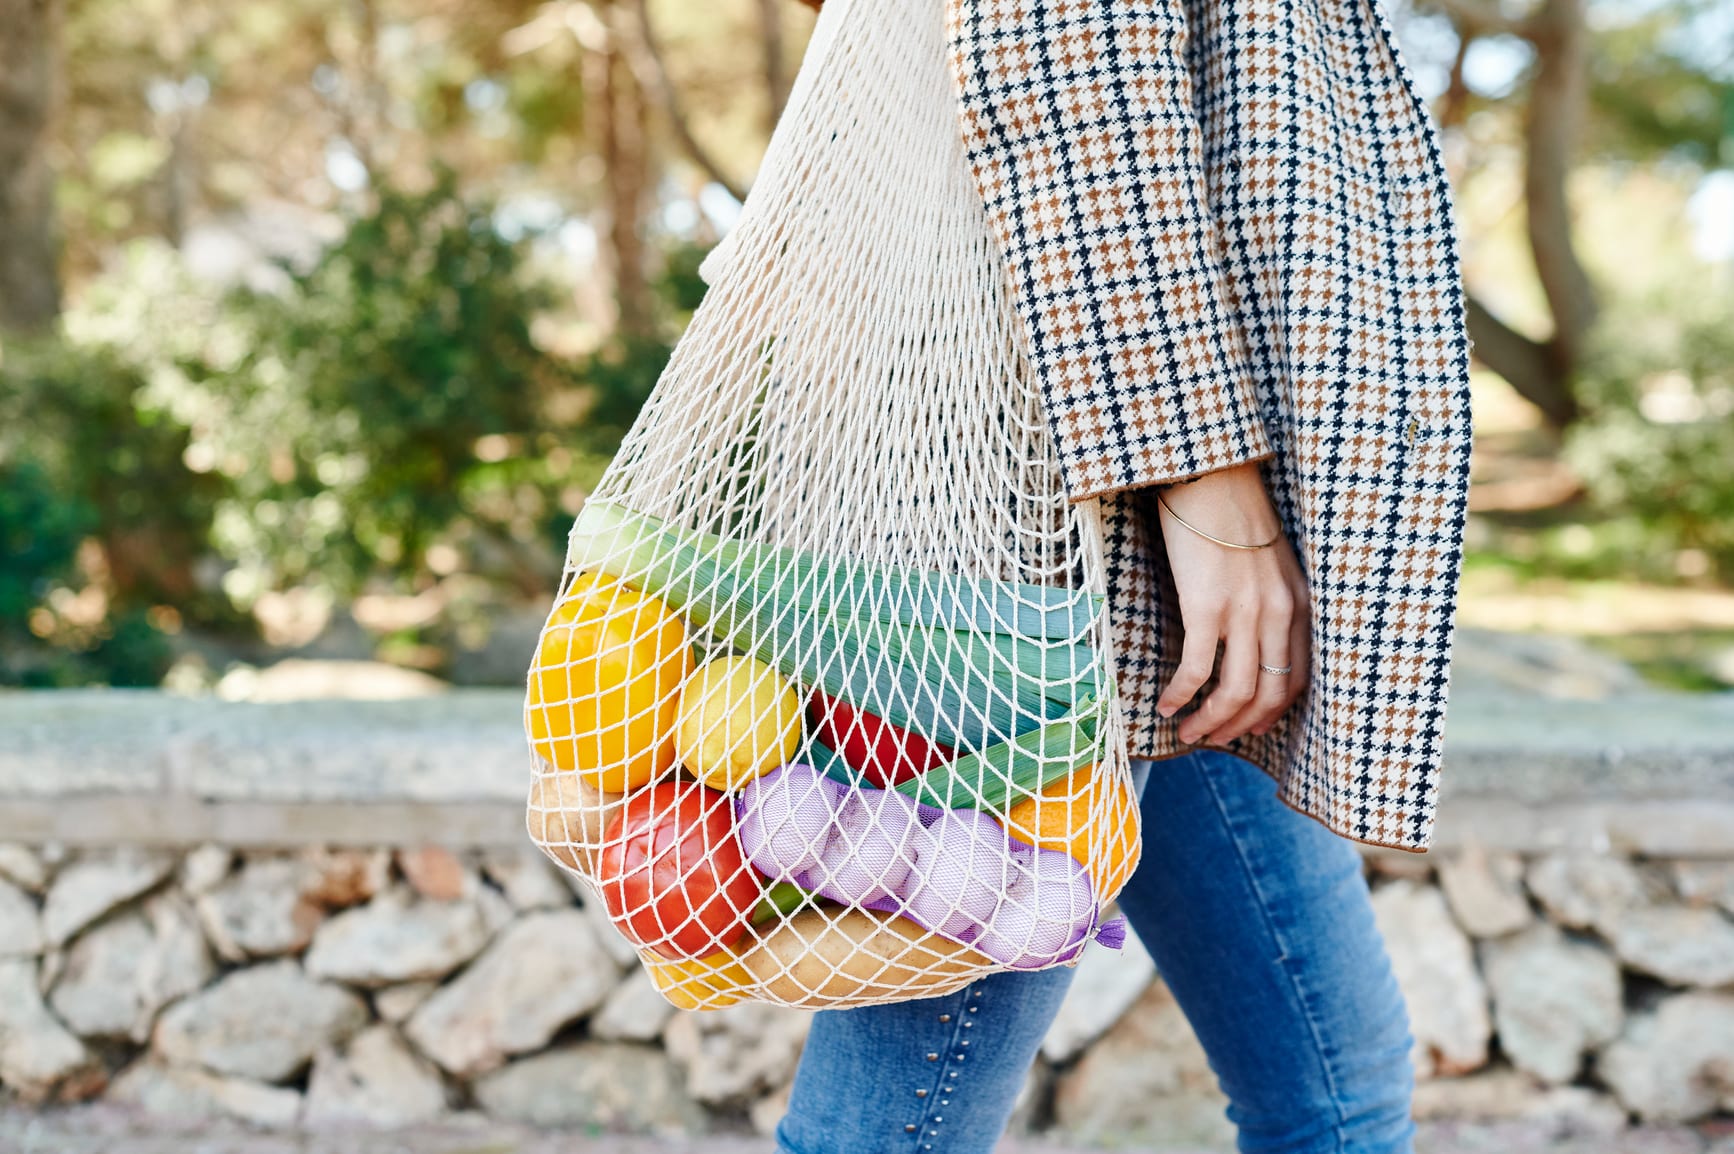 Woman carrying a reusable mesh shopping bag full of healthy fresh vegetables while walking along a sidewalk